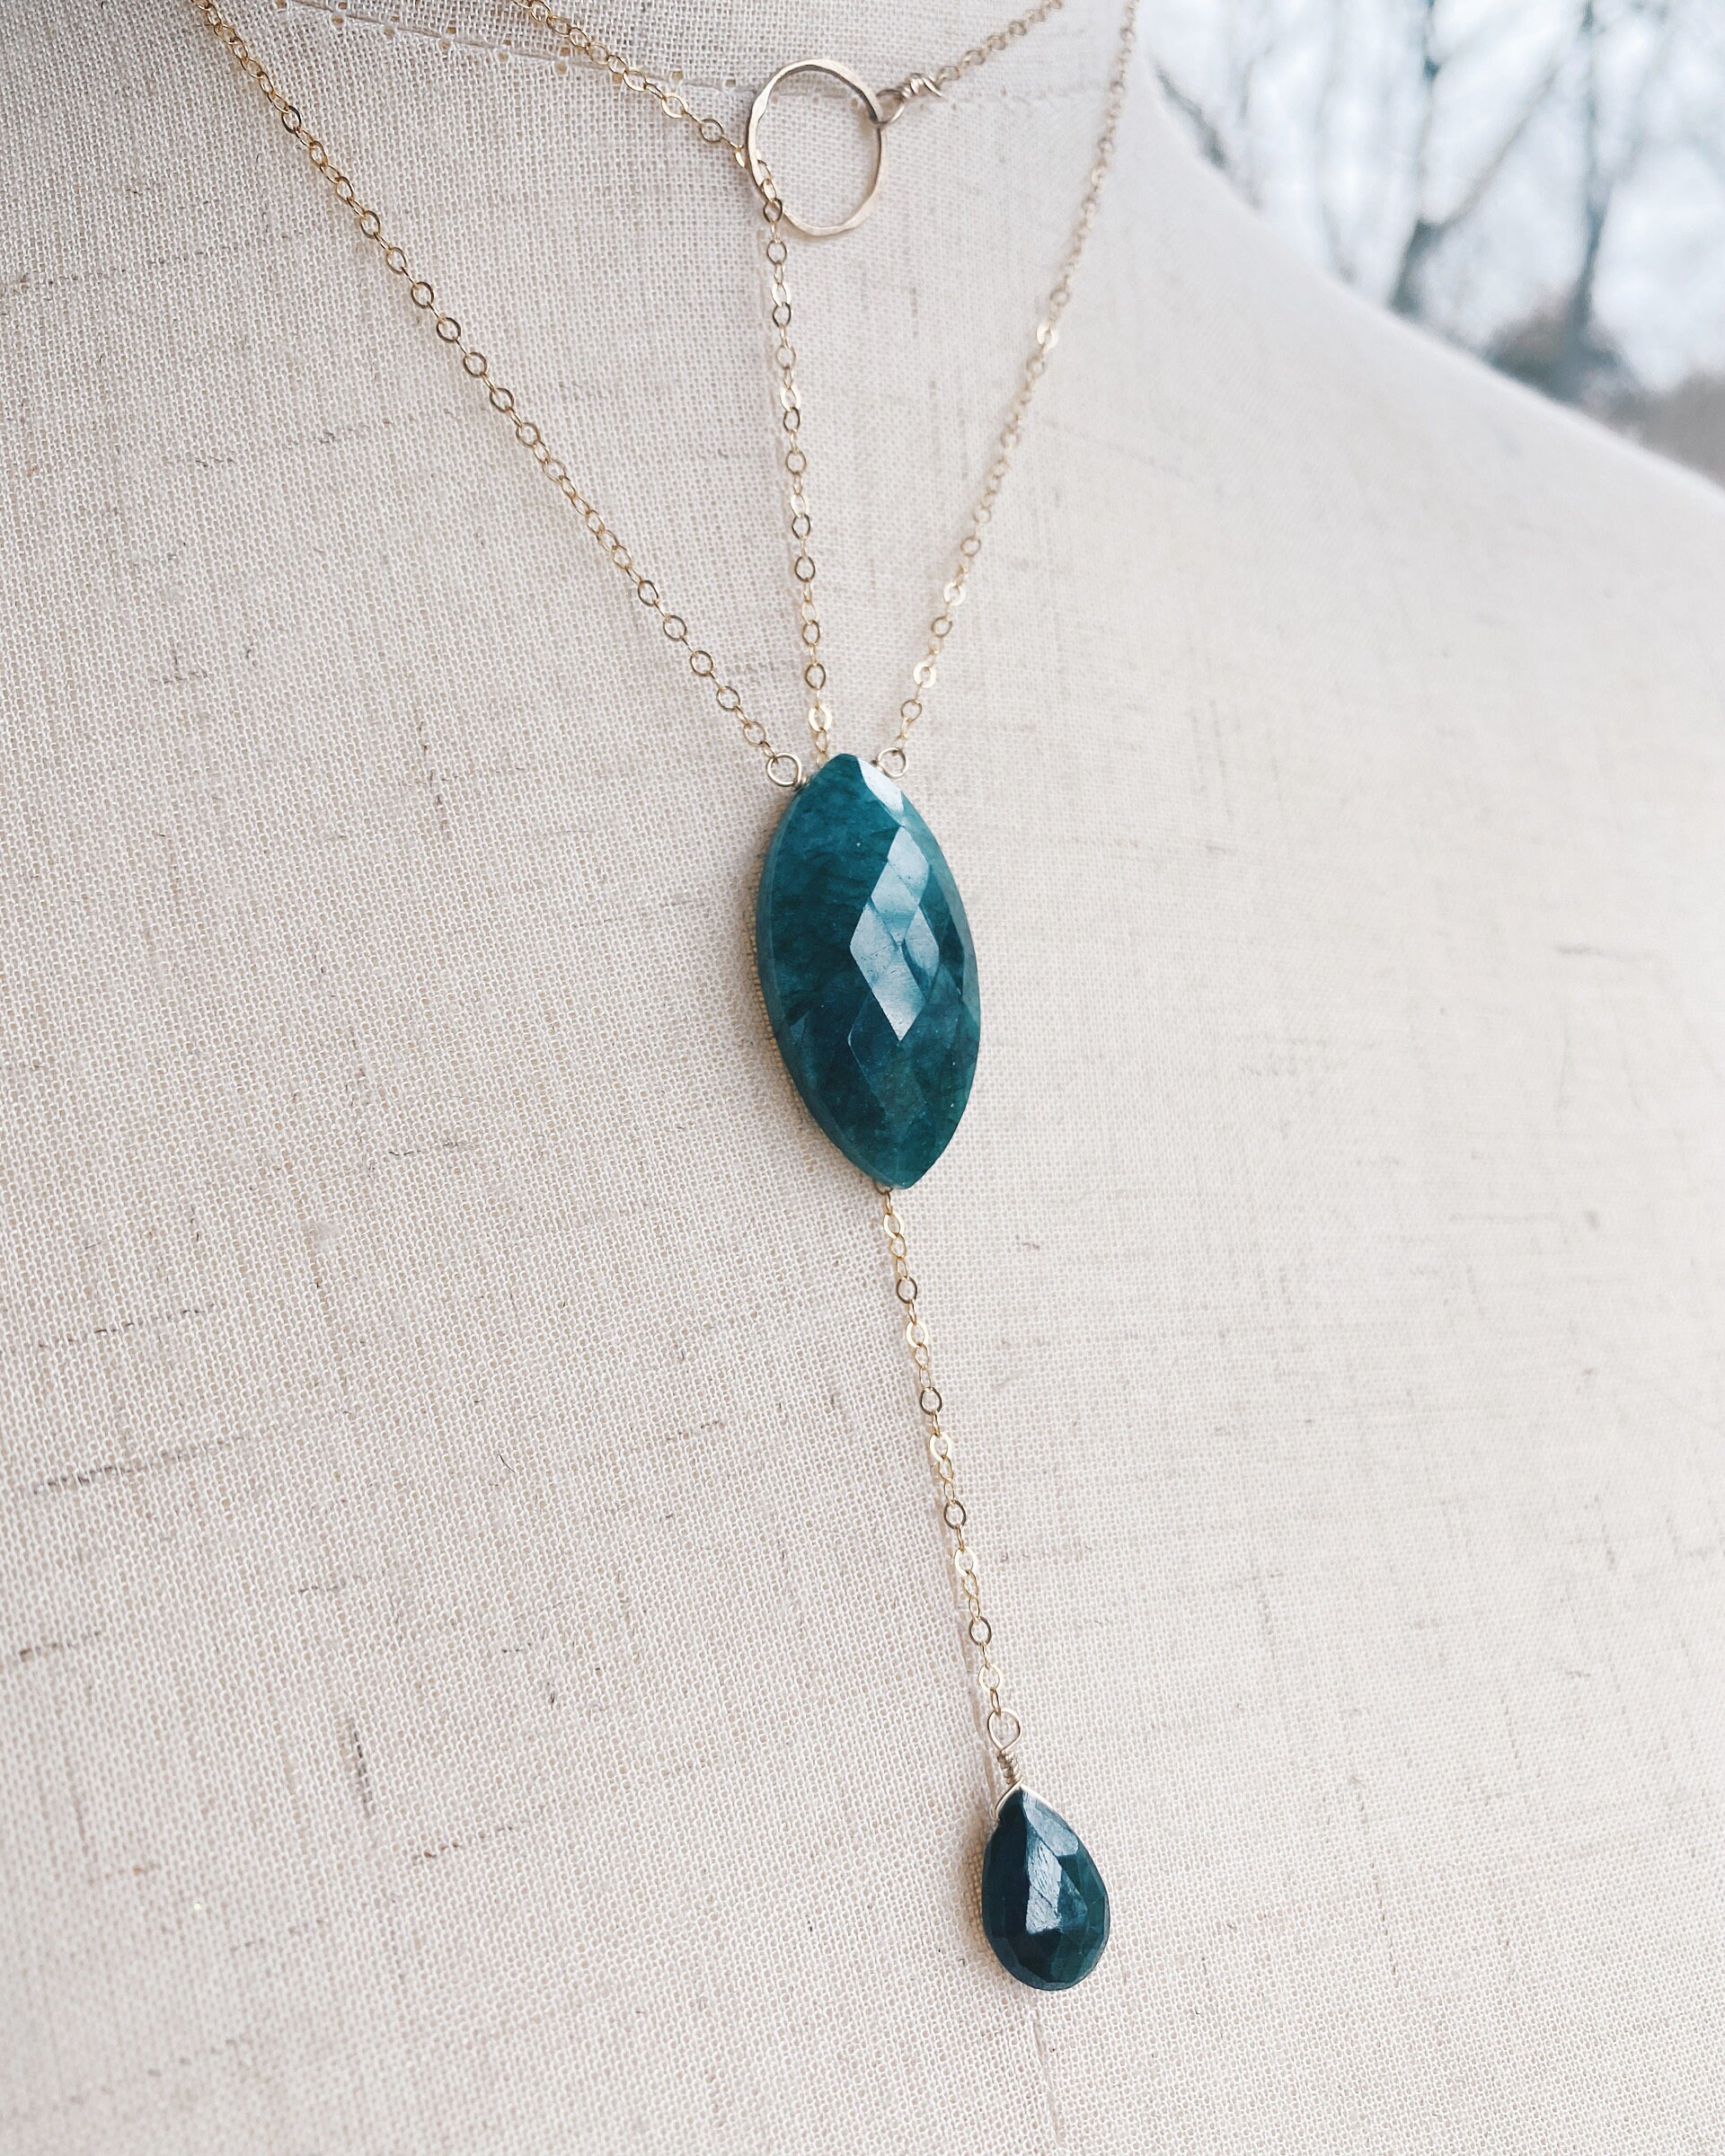 Emerald Gemstone Necklace // Large Gemstone Faceted Necklace // by Rana ...